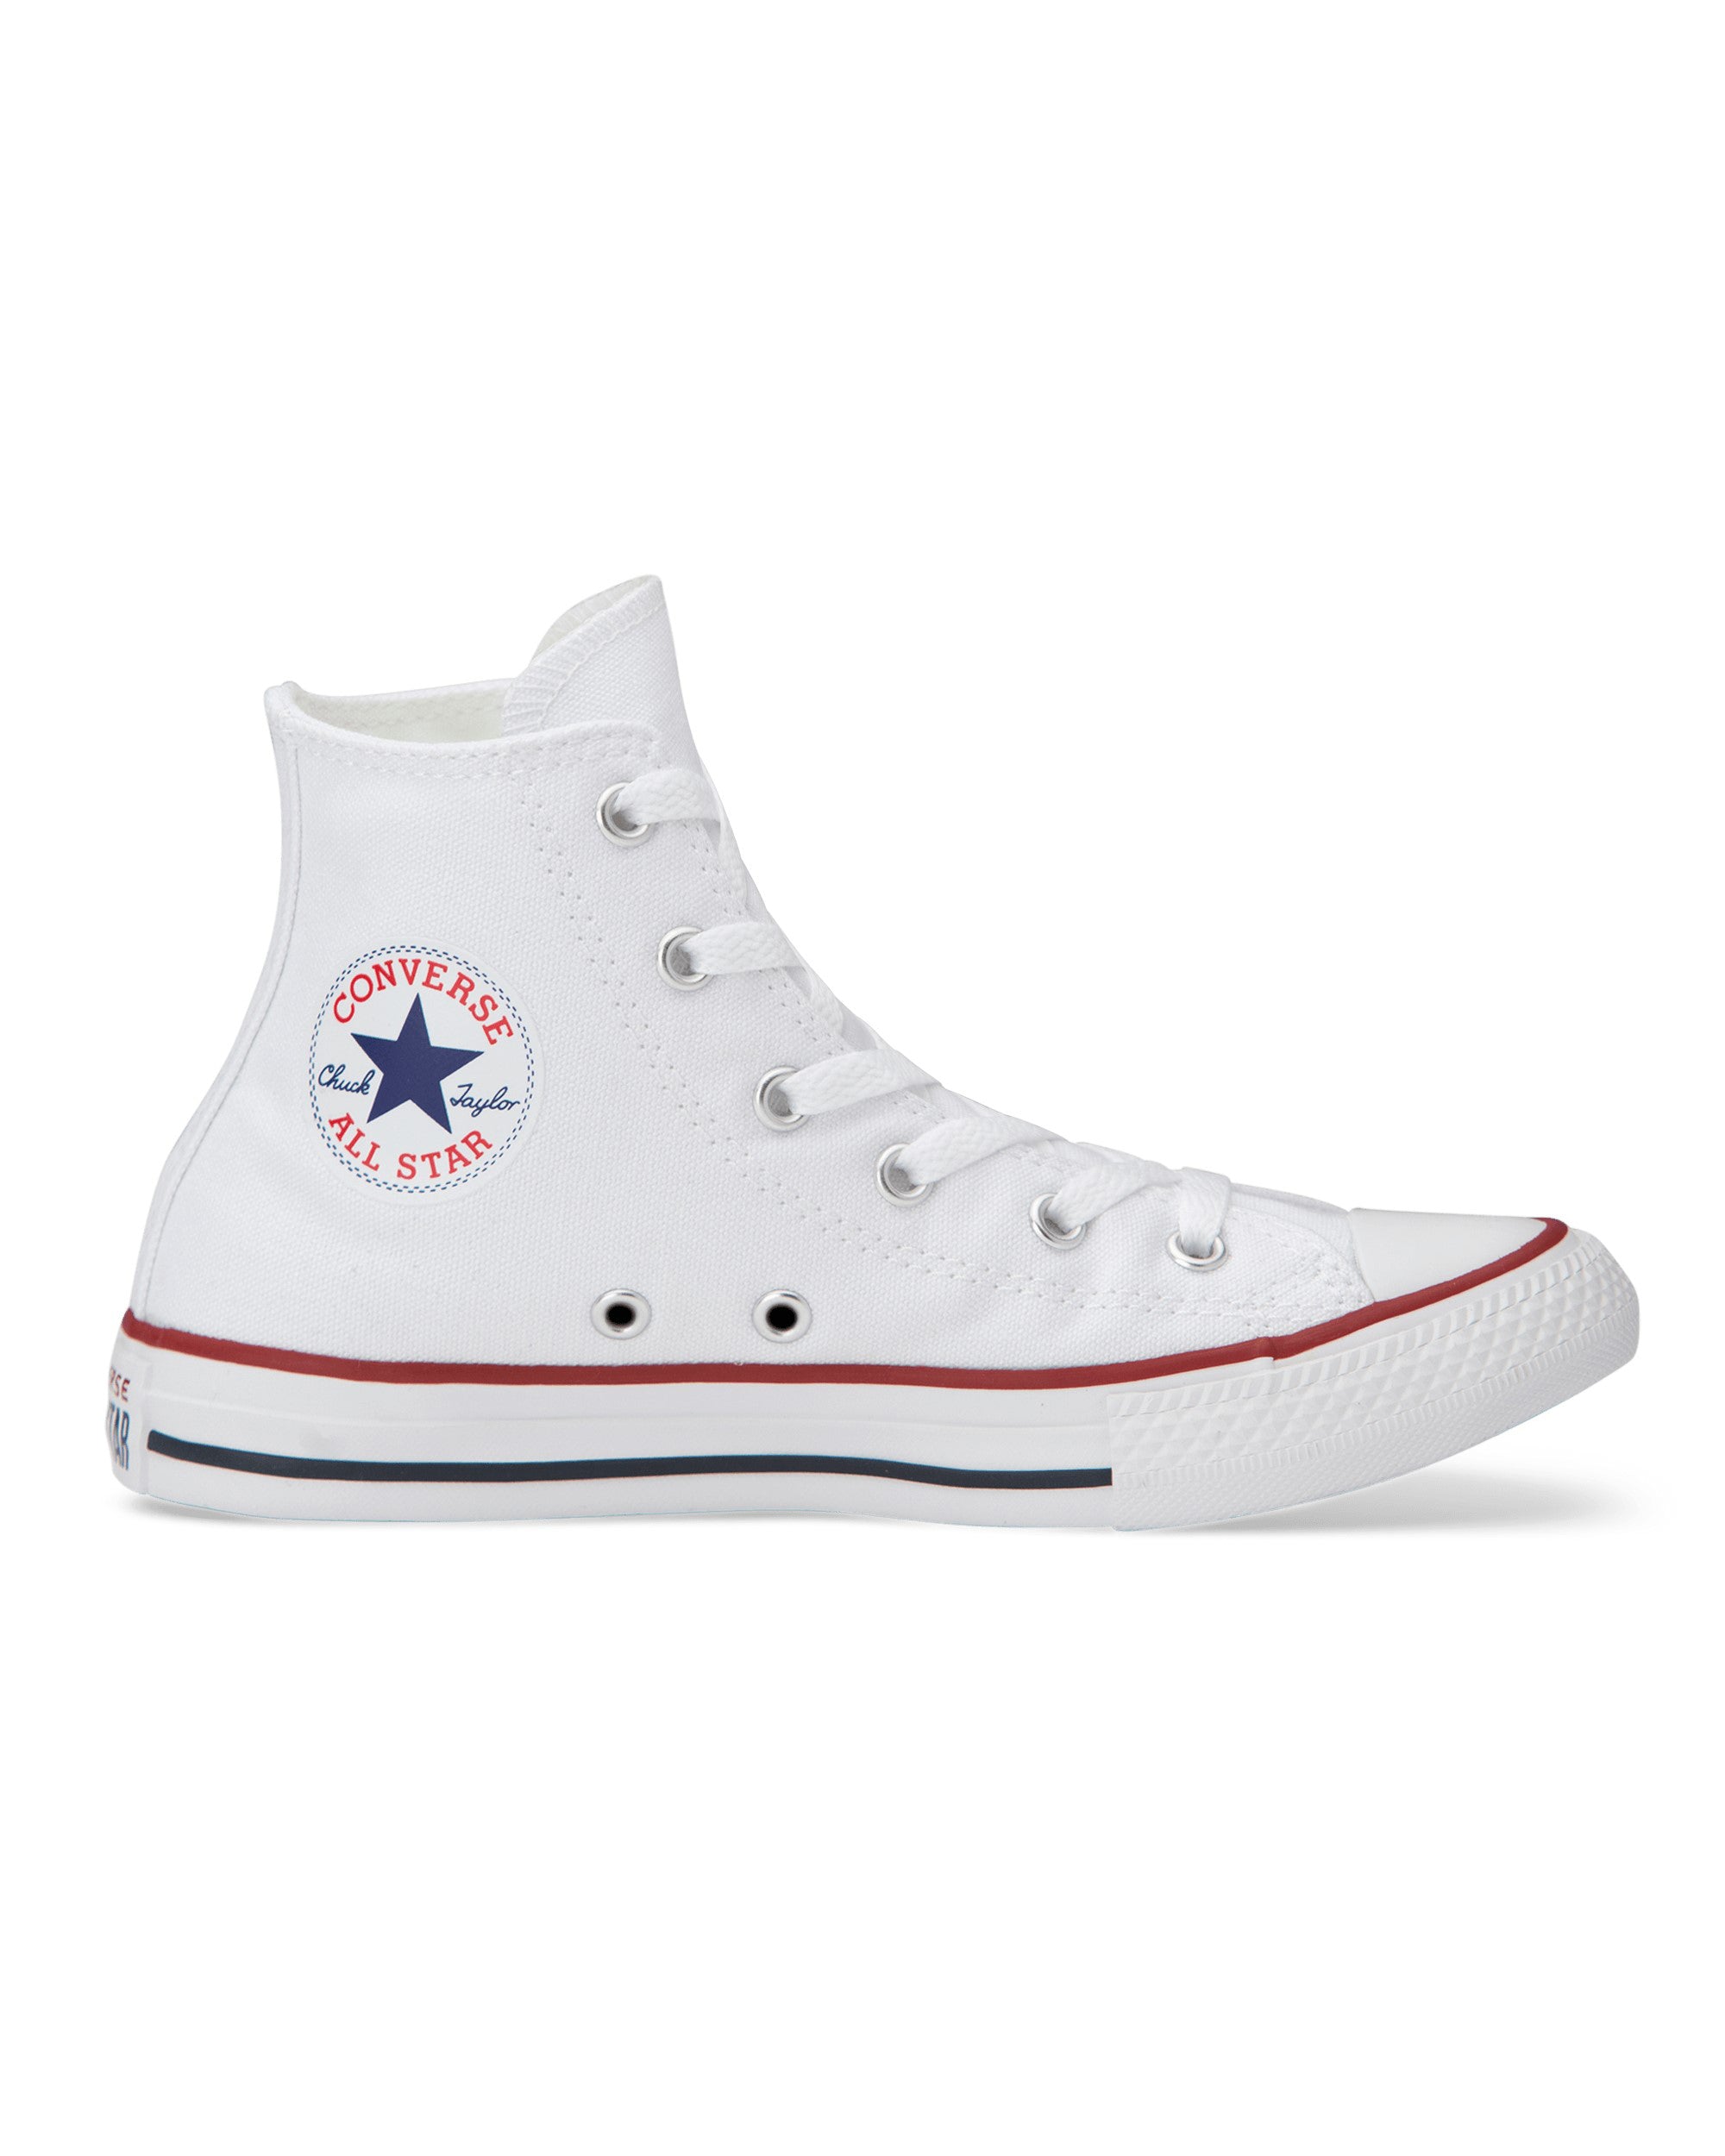 Converse Chuck Taylor All Star Classic Youth Hi Top - White